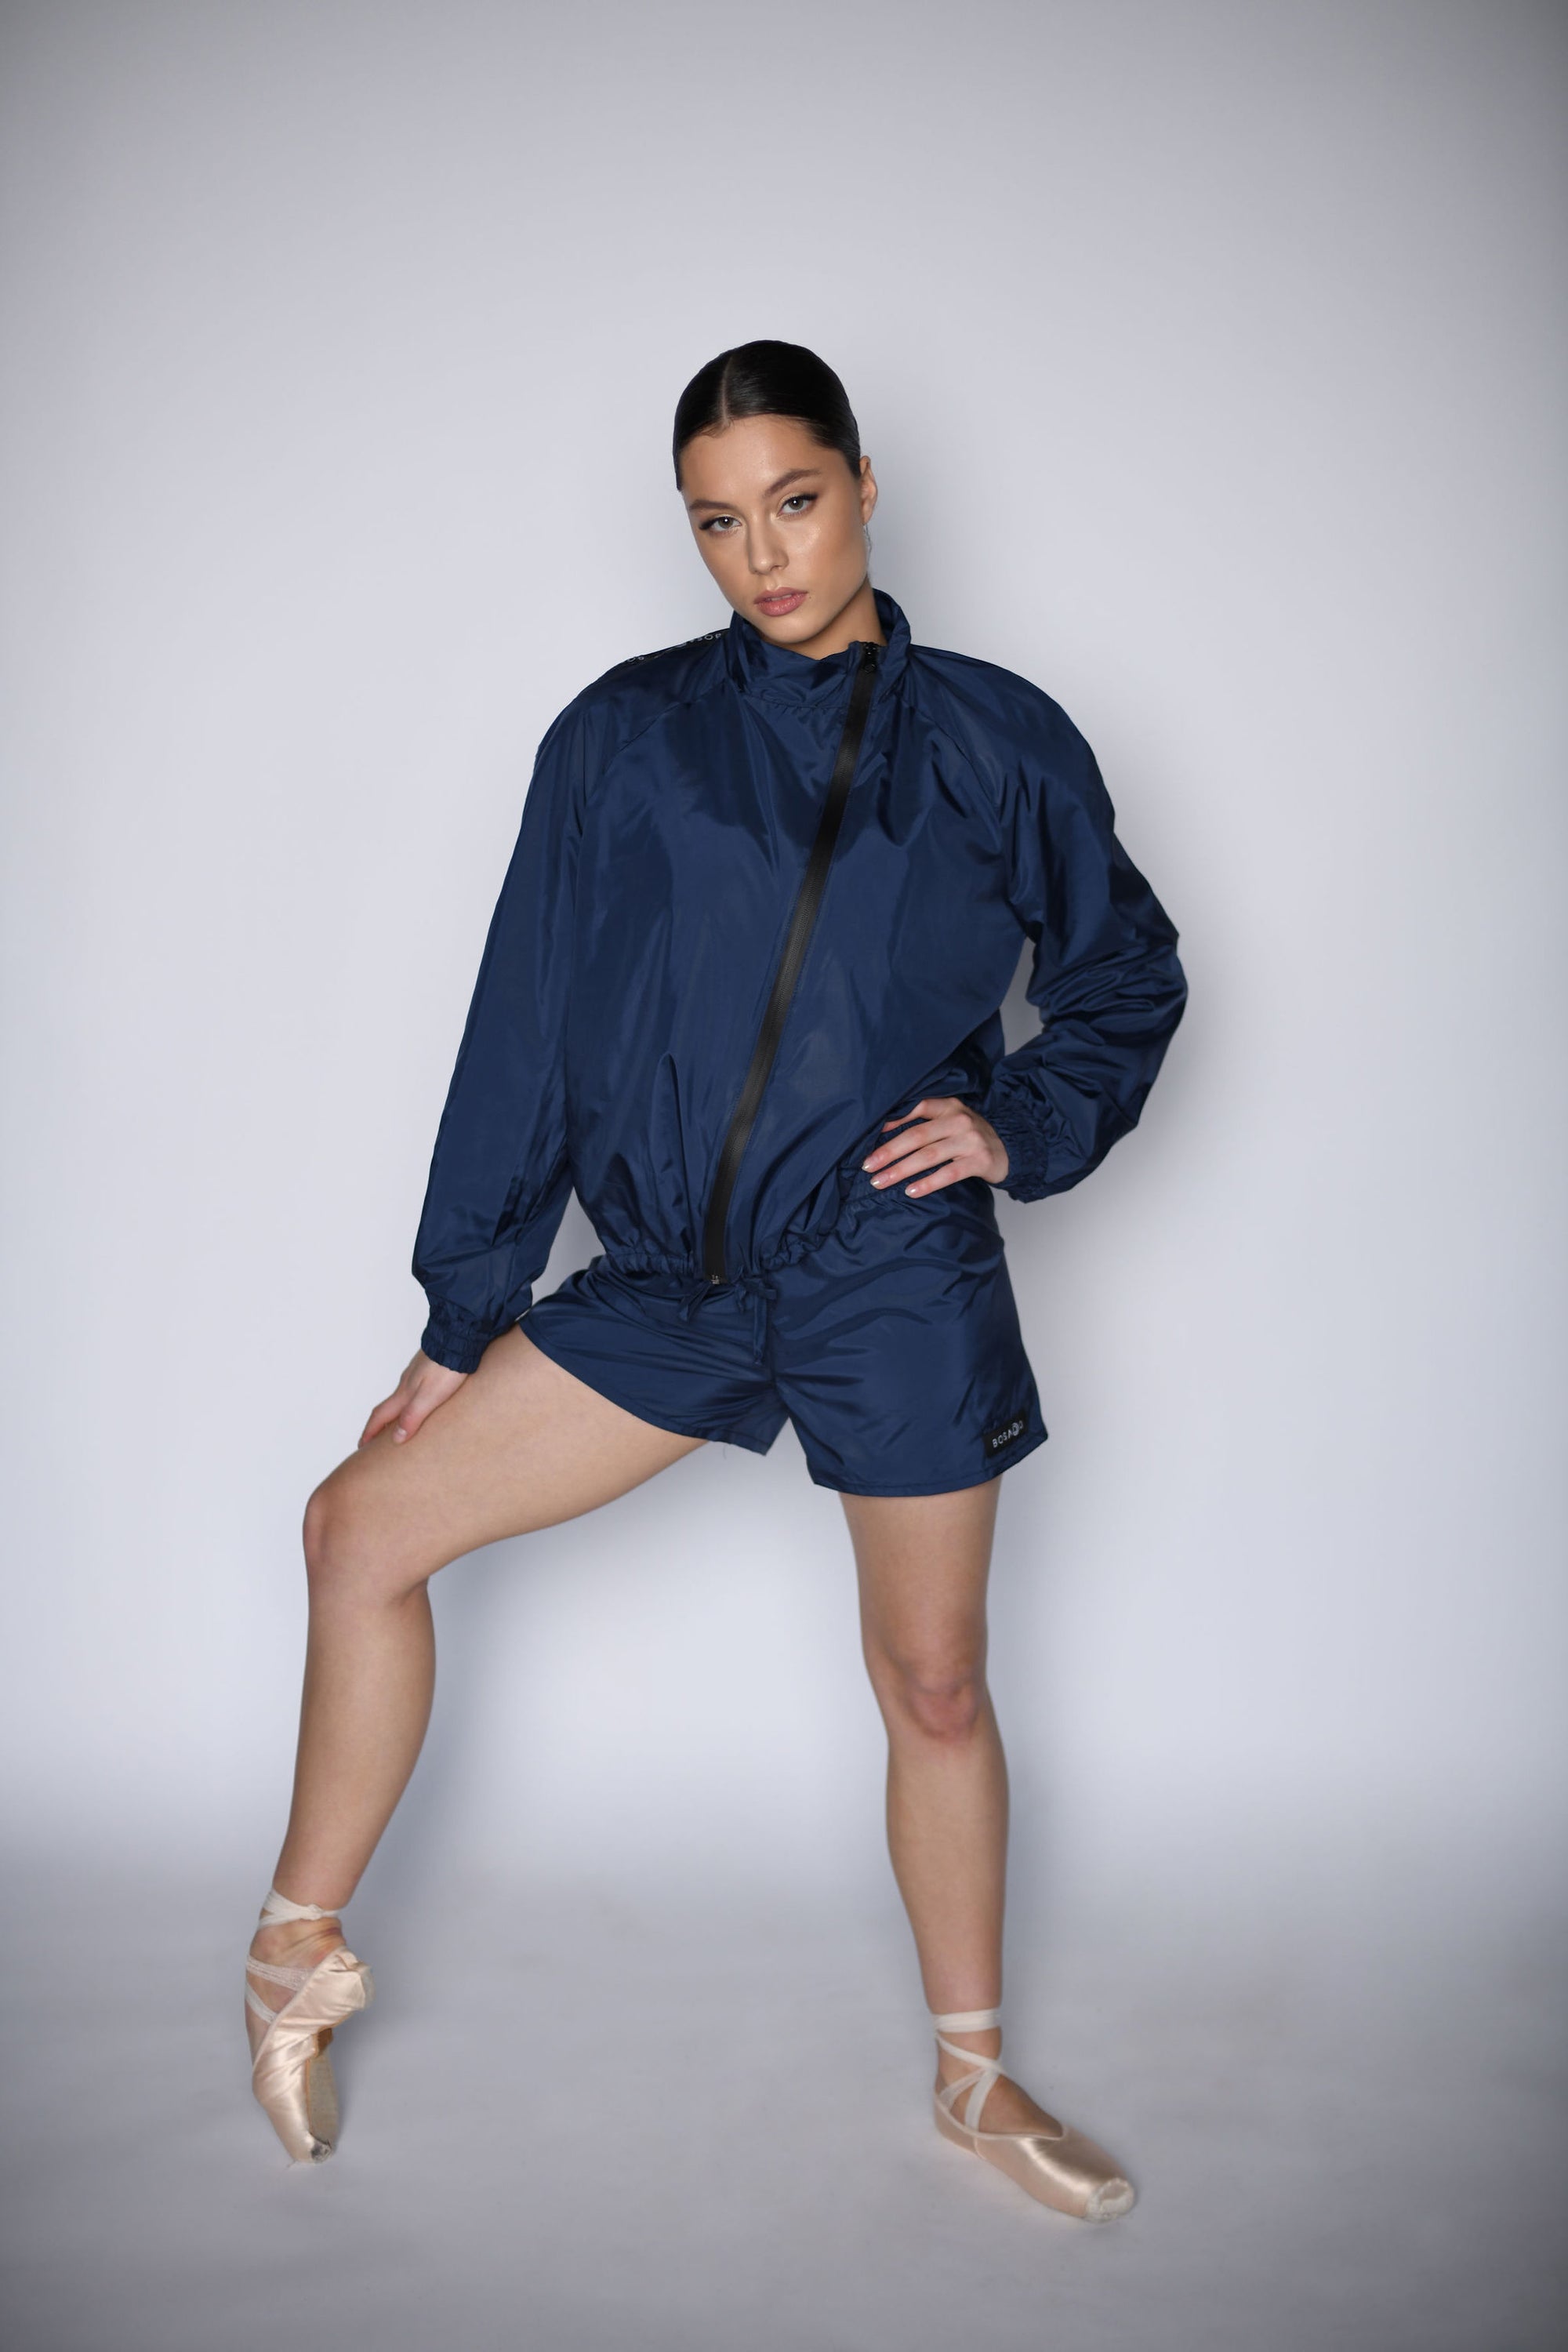 NEW URBAN SWAN COLLECTION S/S 23 | Royal blue sports suit with pants + shorts